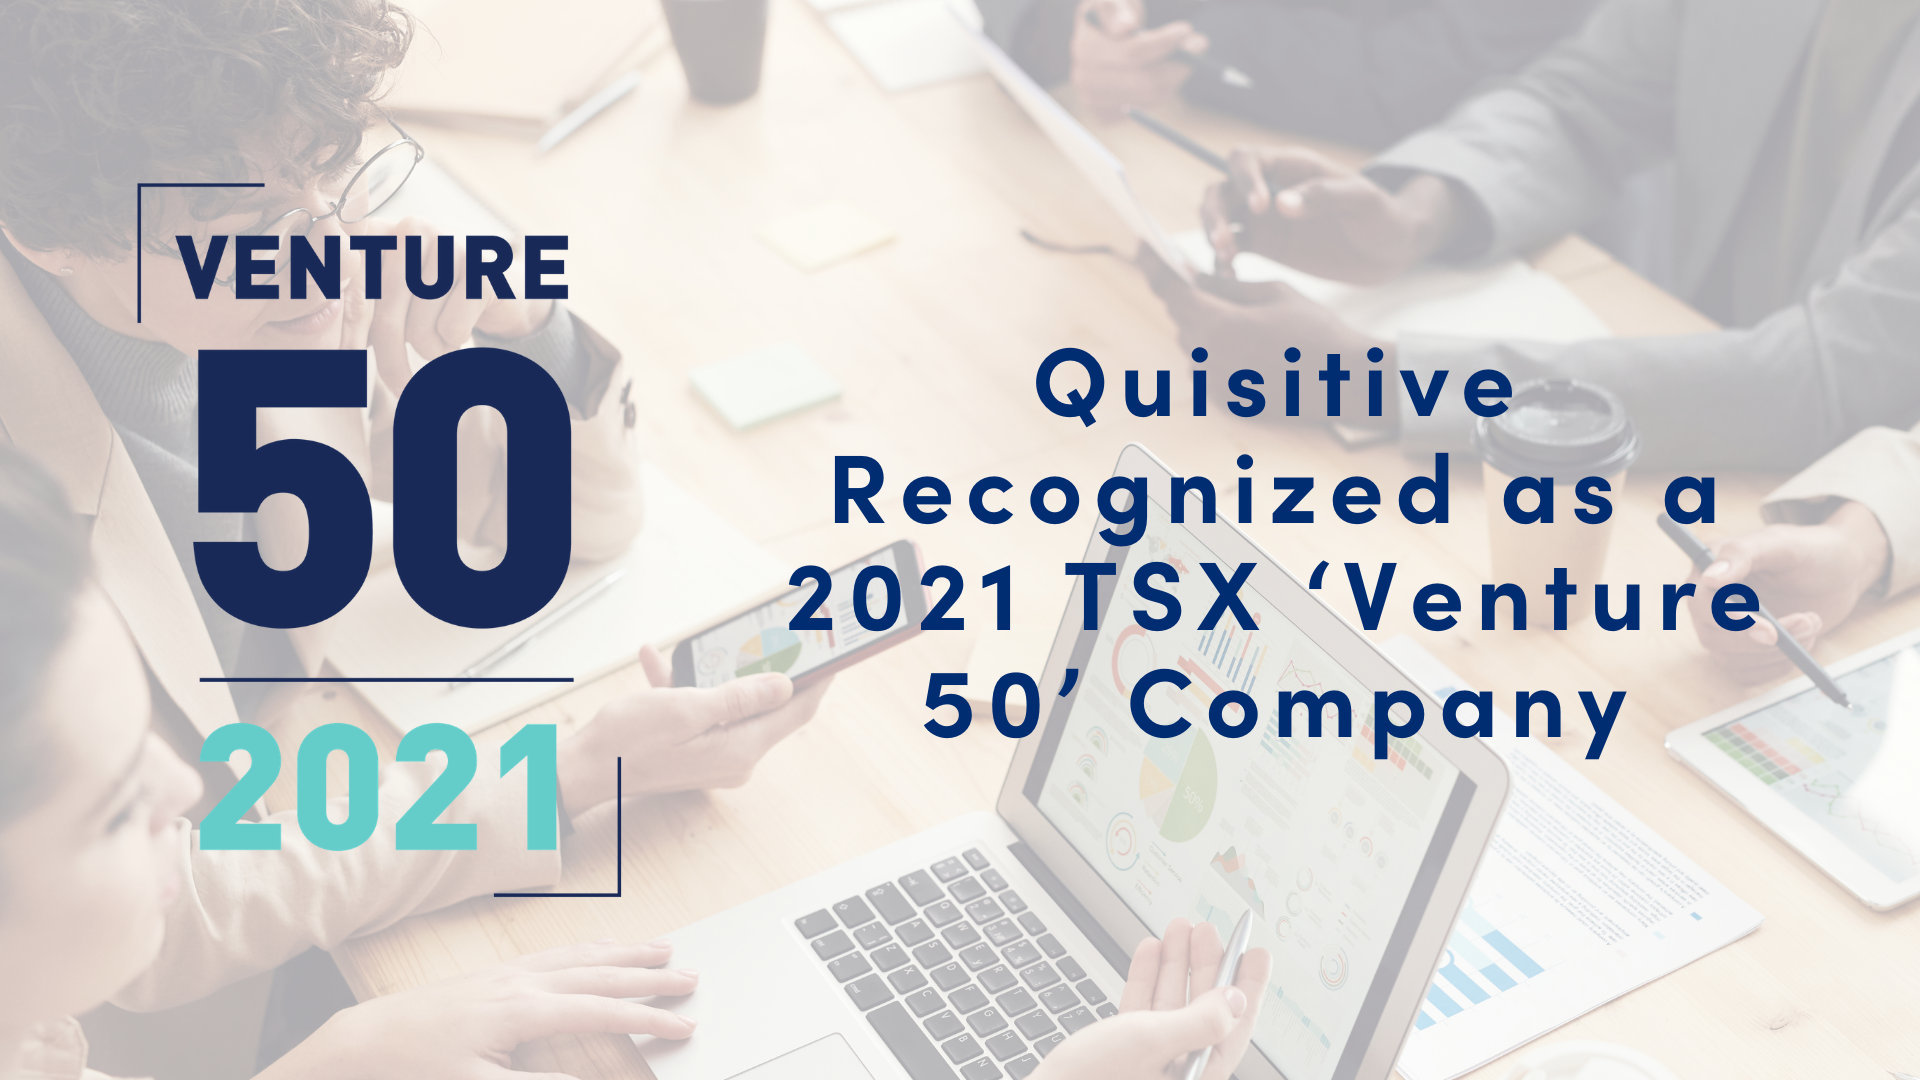 Image of two women collaborating with Venture 50 2021 logo and text that reads Quisitive Recognized as a 2021 TSX Venture 50 Company